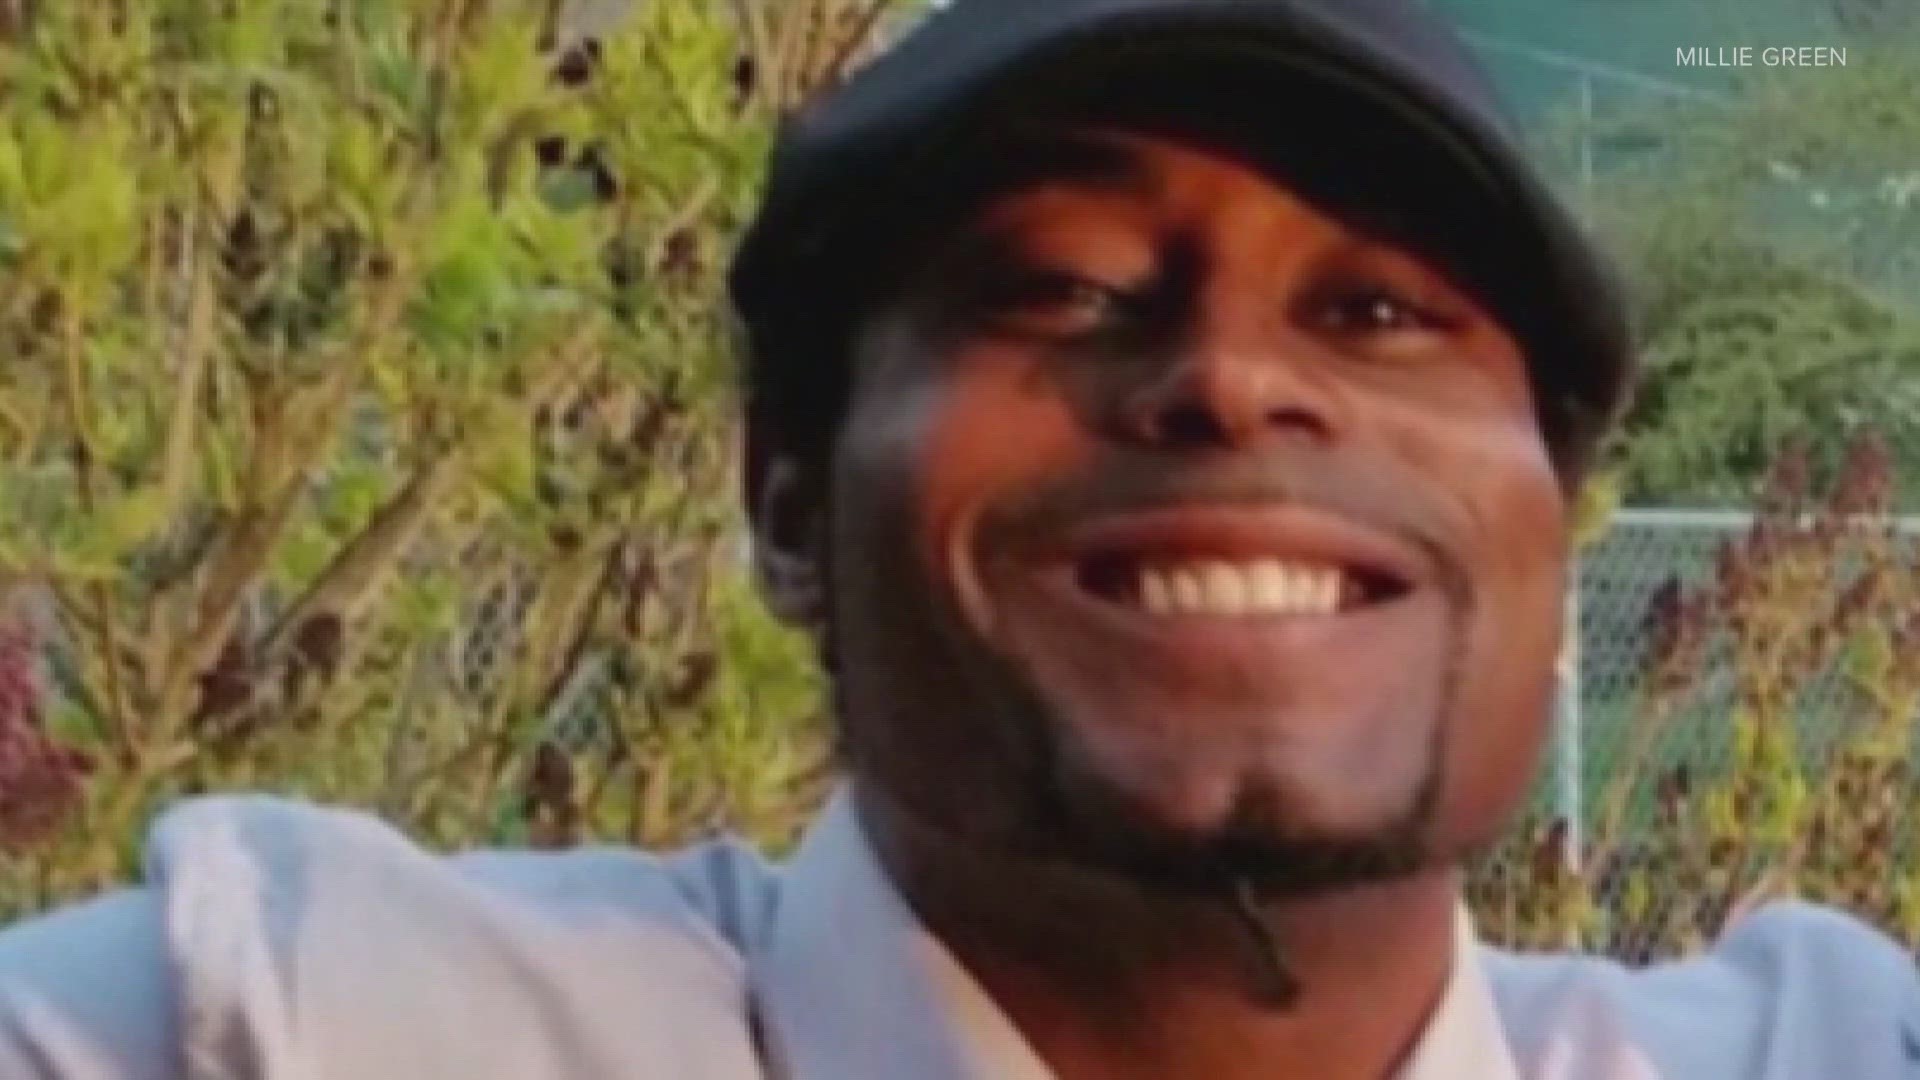 Timothy Green, 37, was shot and killed in August of 2022 after there were reports of him acting erratically in a public parking lot.